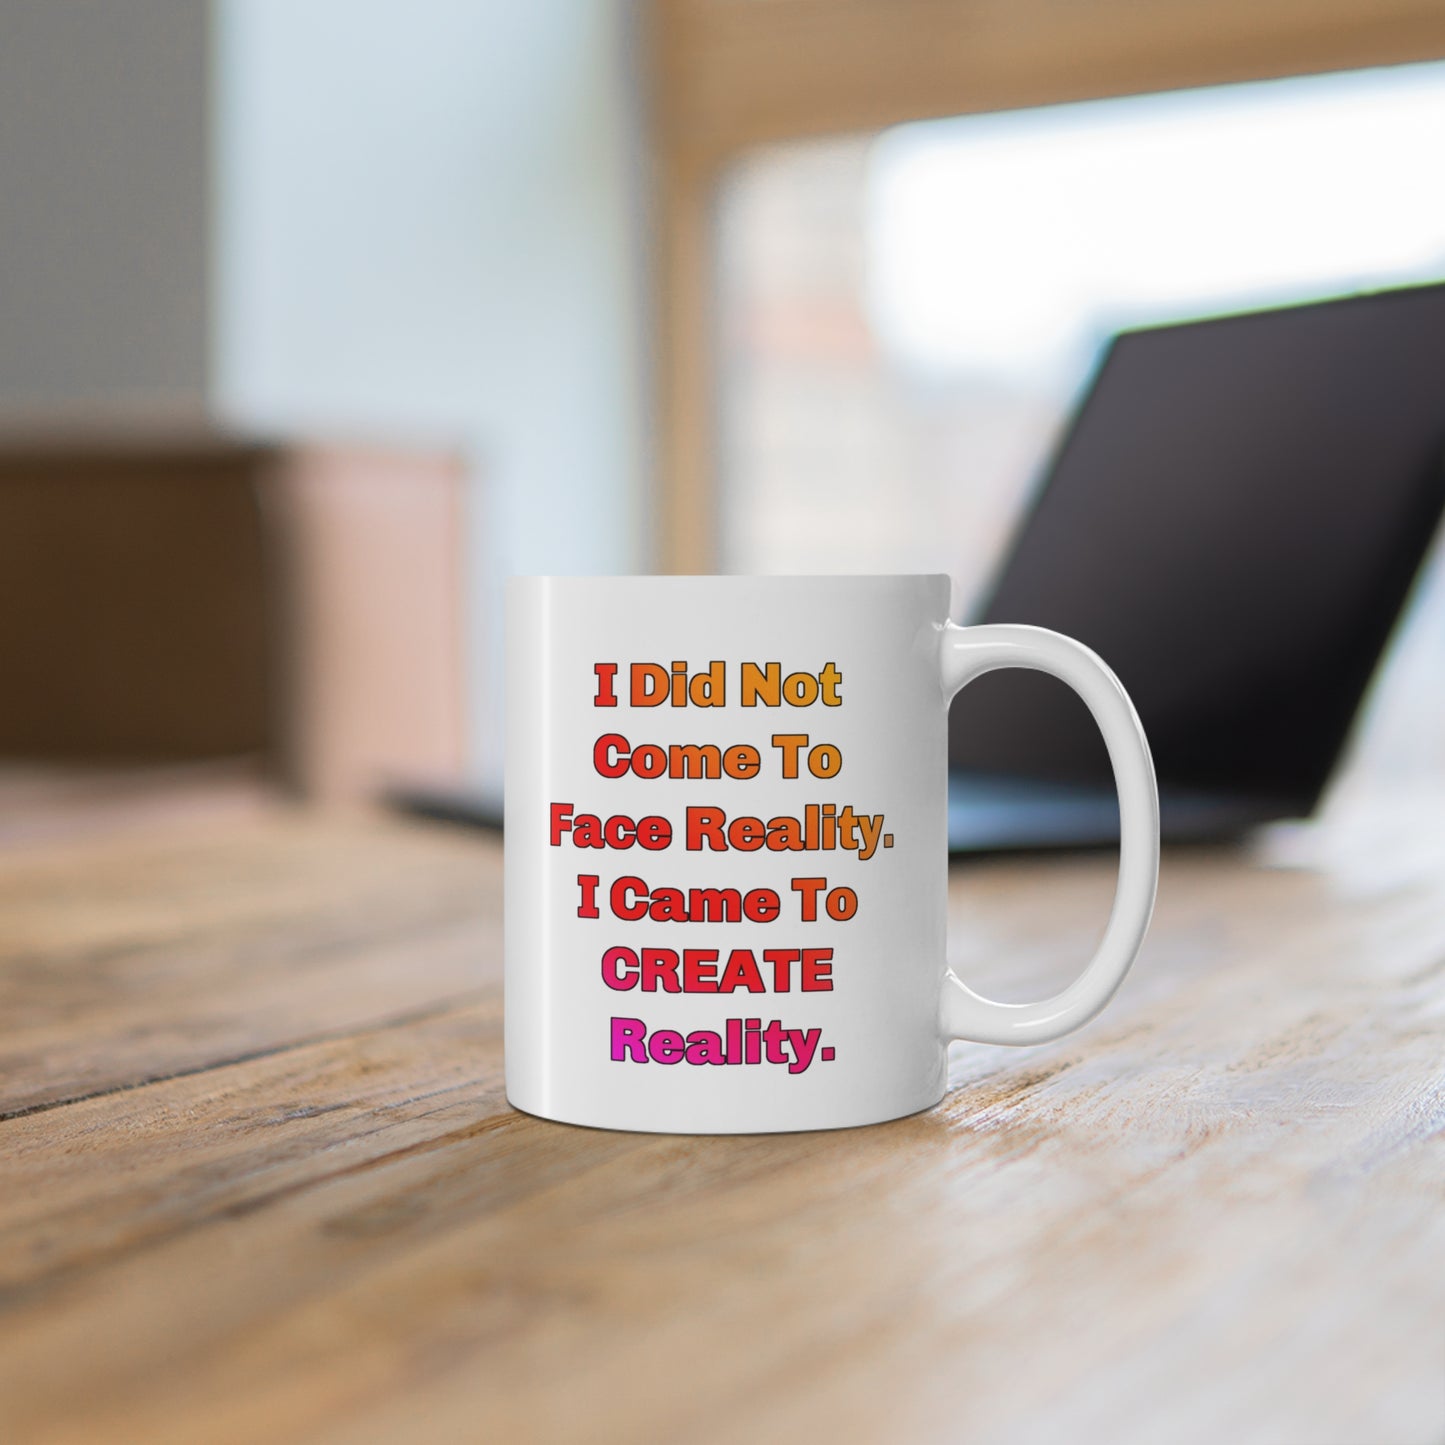 You Did Not Come To Face Reality, You Came To CREATE Reality. Abraham Hicks Quote - Law Of Attraction Coffee Cup